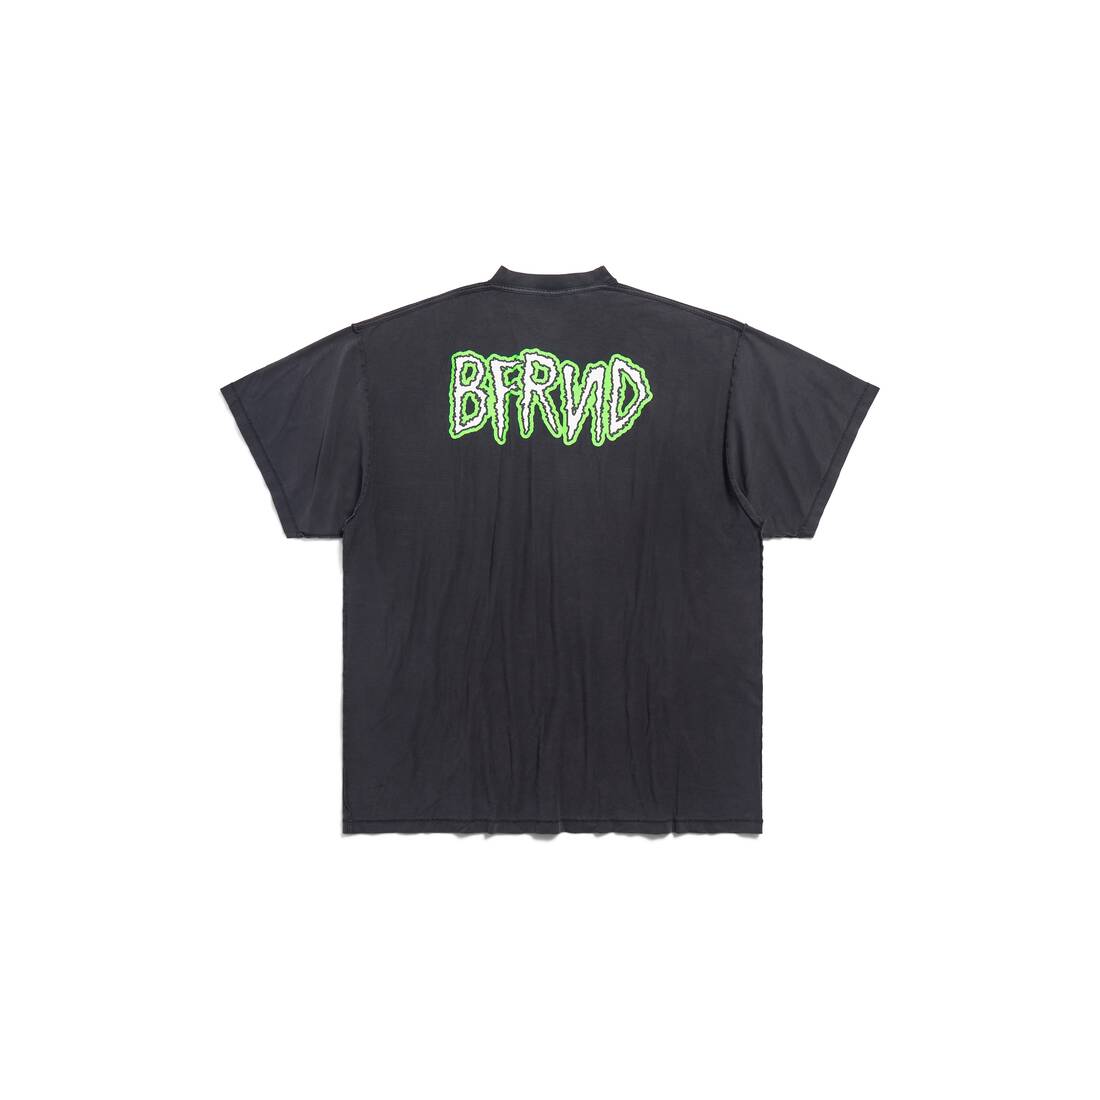 Balenciaga Music | Bfrnd Series Inside-out T-shirt Oversized in Black Faded